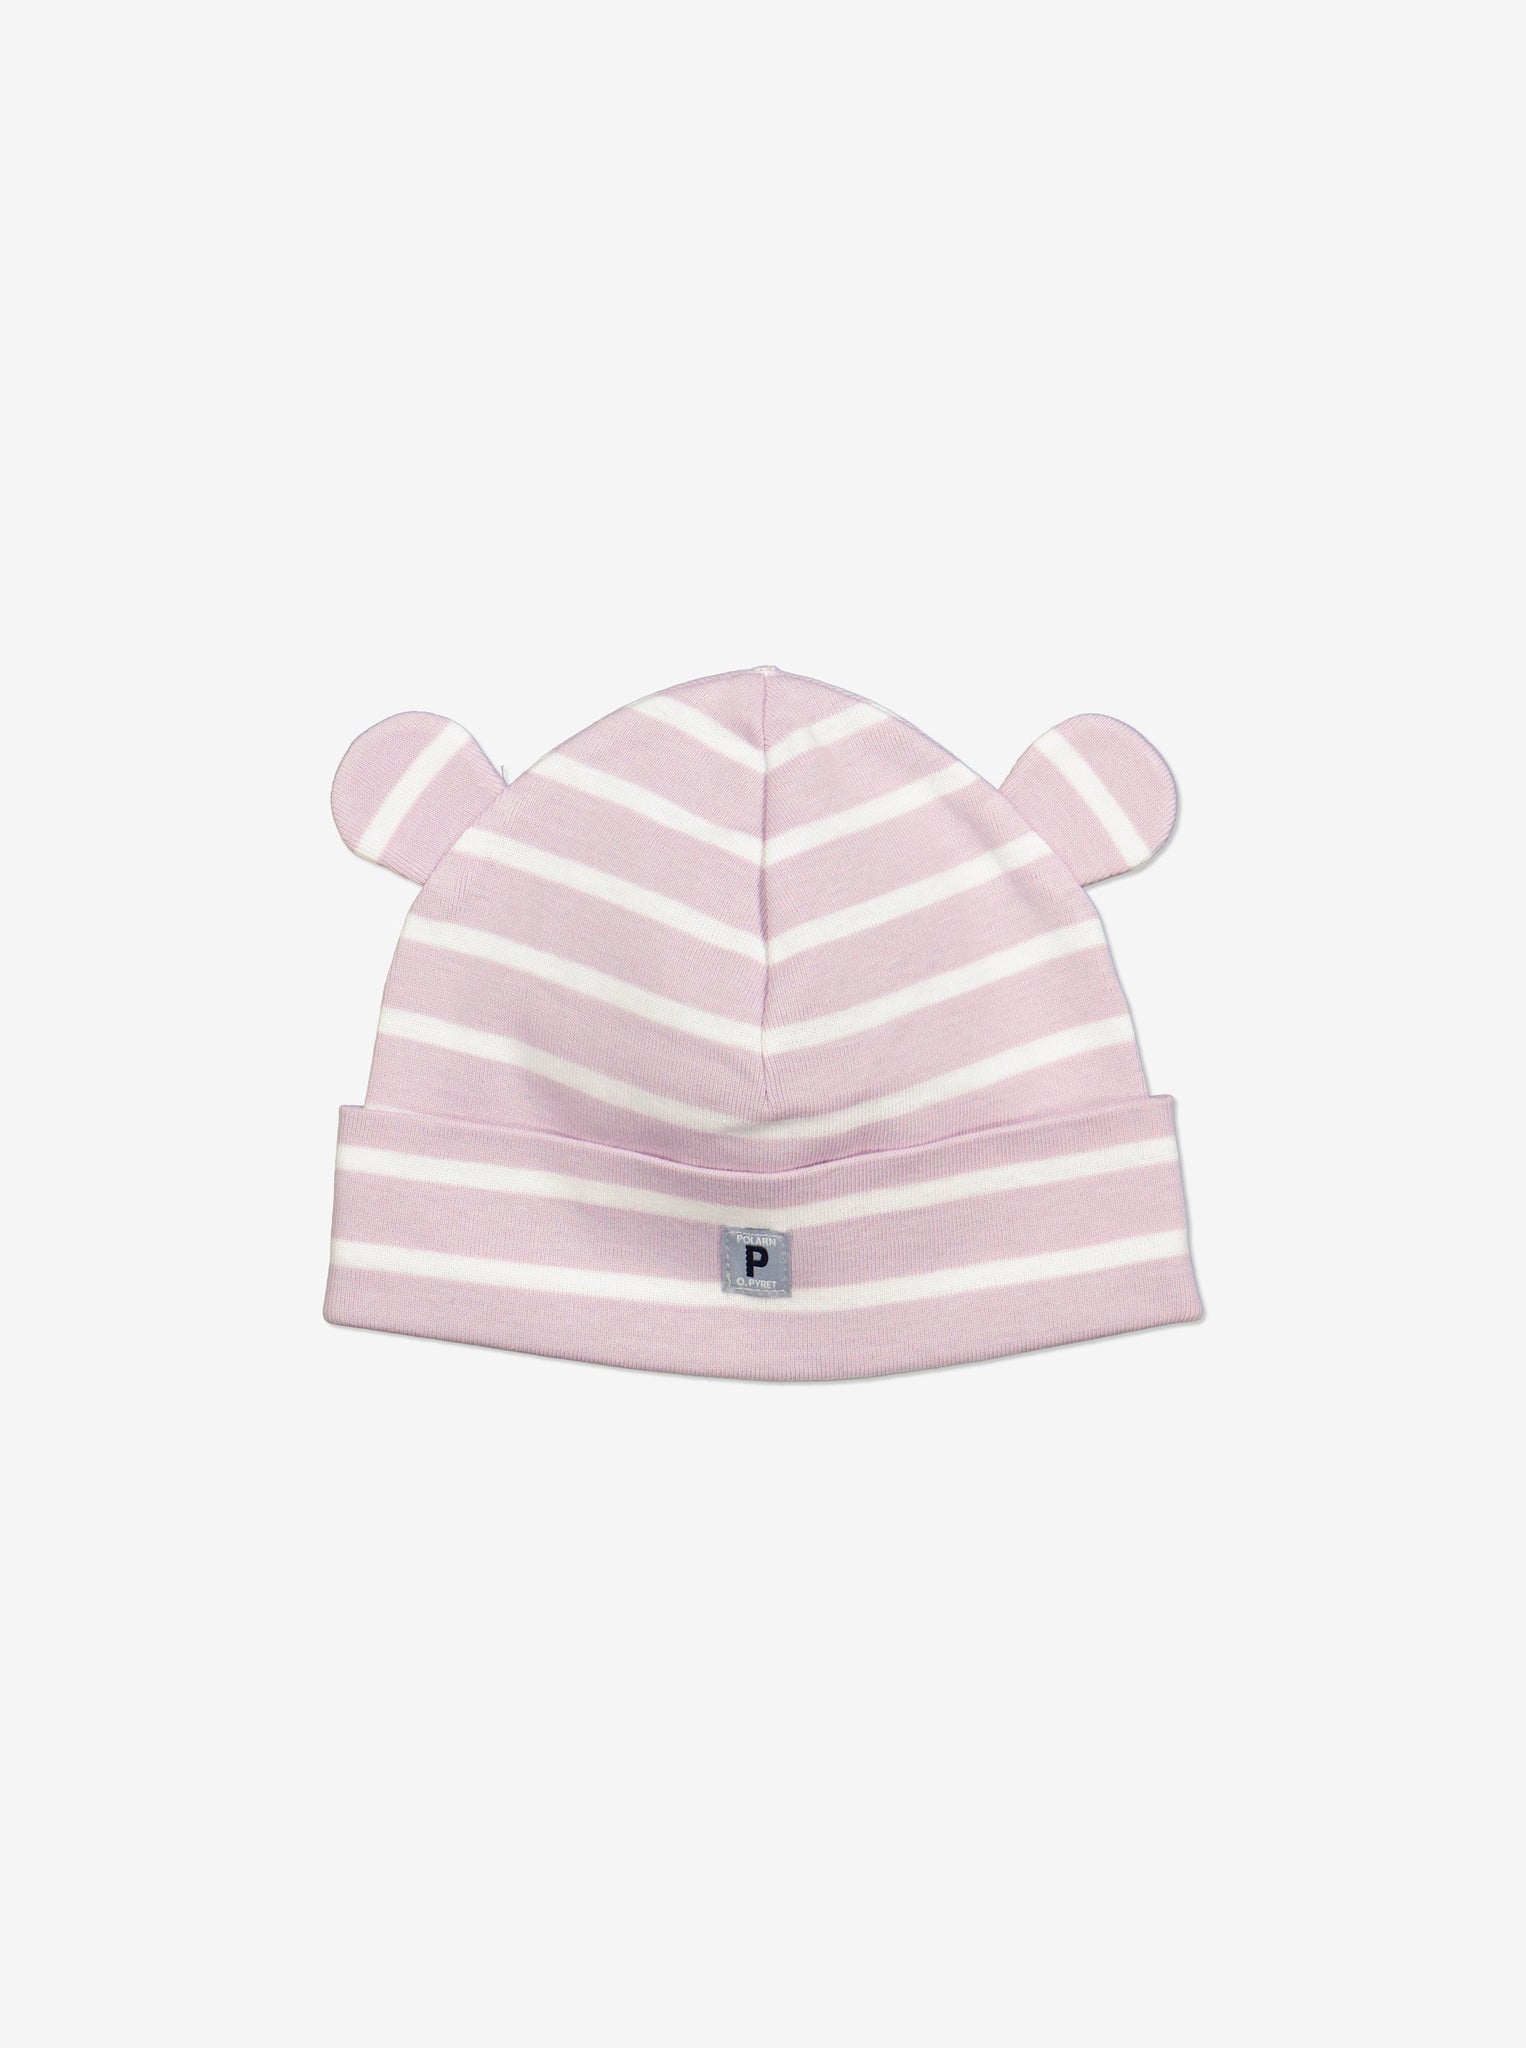  Organic Pink Baby Beanie Hat from Polarn O. Pyret Kidswear. Made with 100% organic cotton.